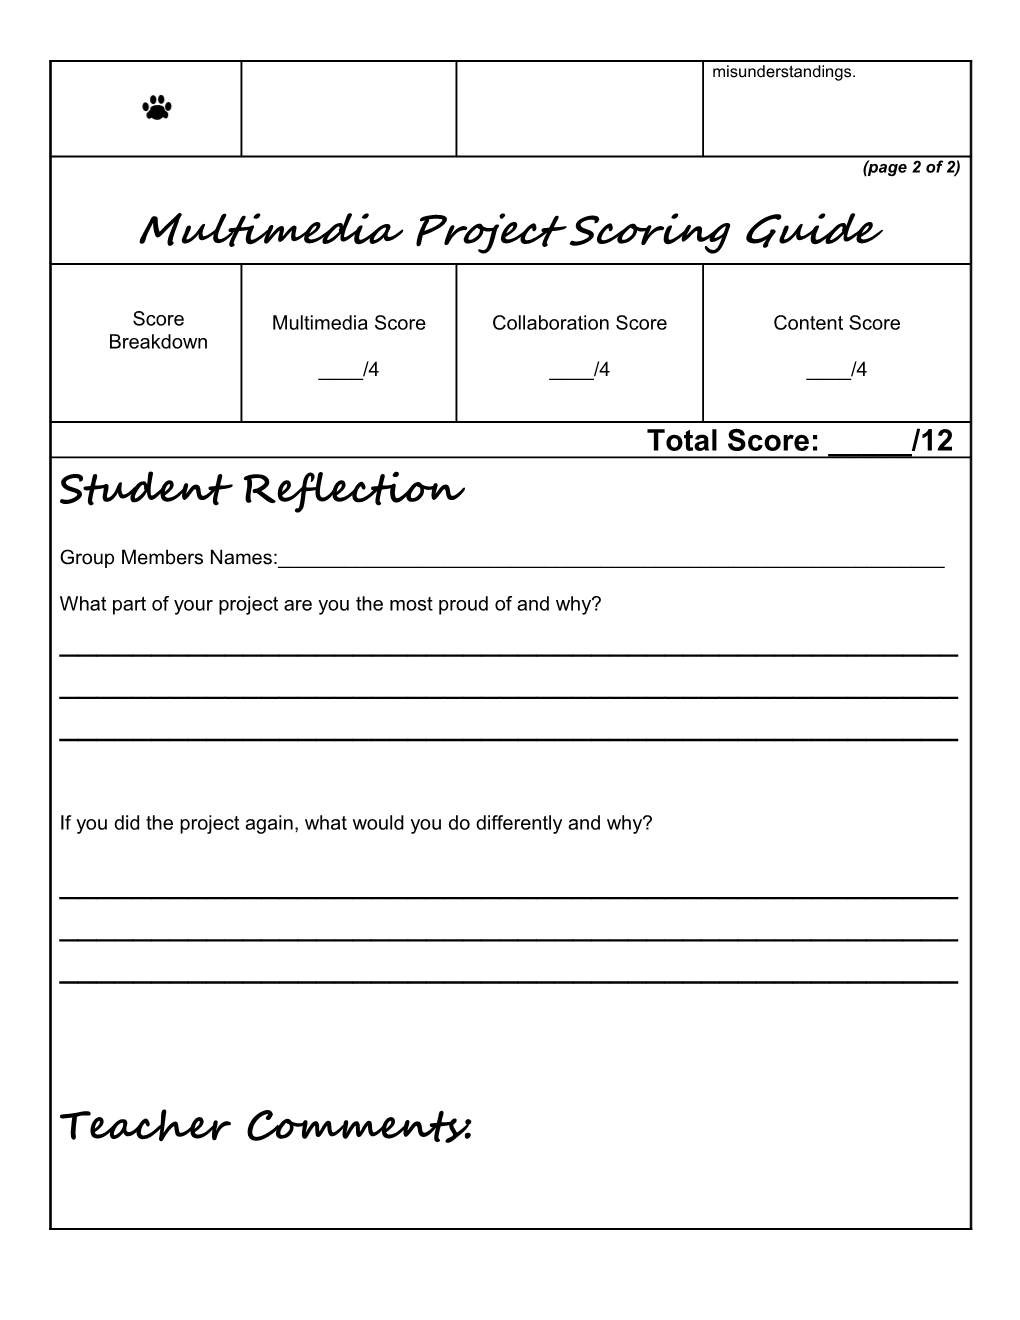 Multimedia Project Scoring Guide Name:______ (Page 1 of 2)